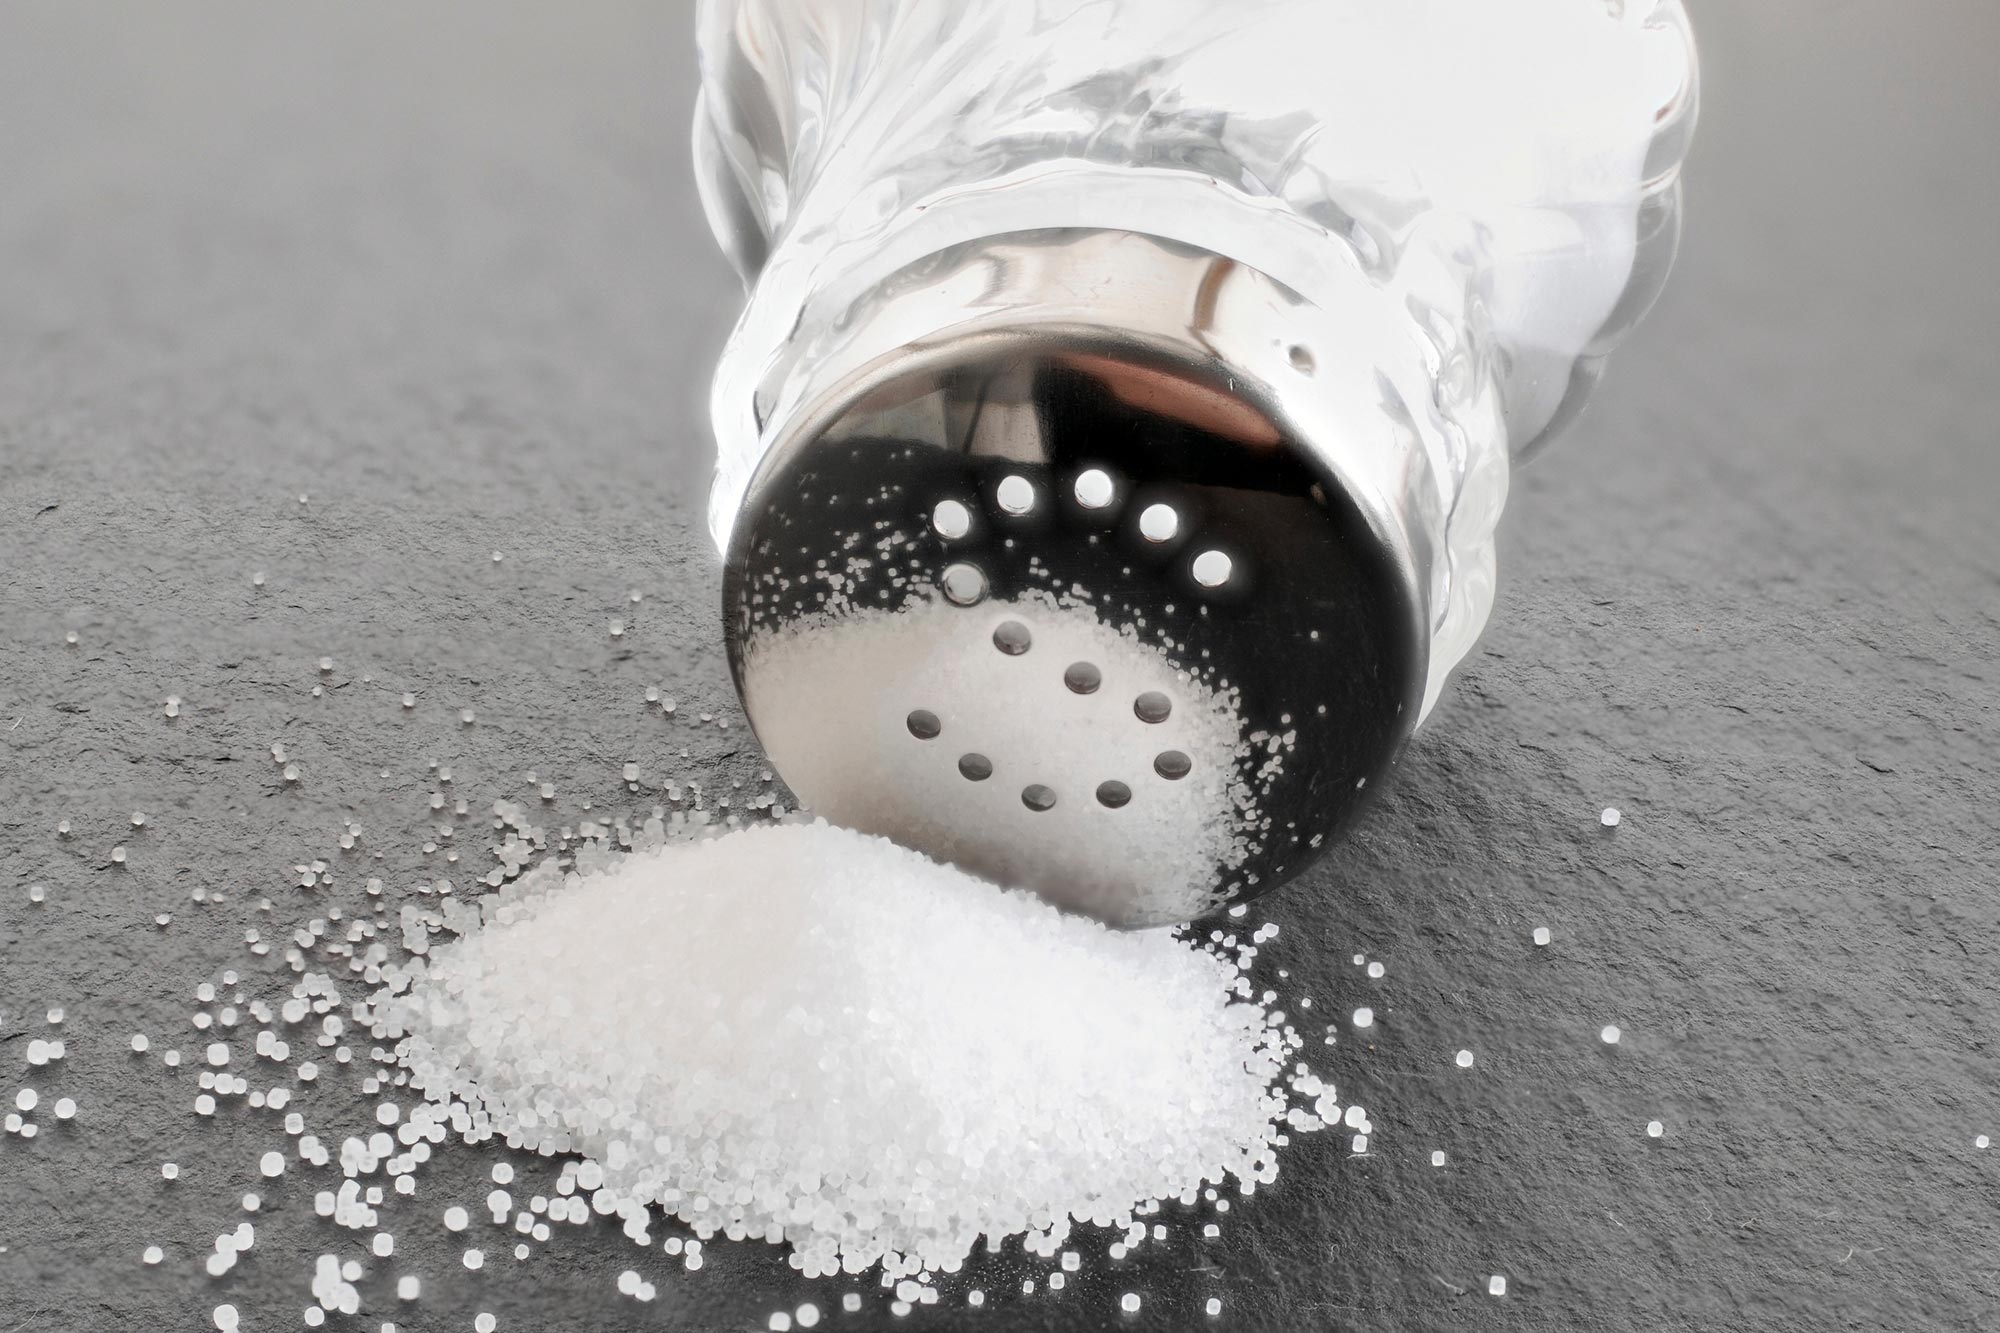 Research Shows Salt Substitutes Lower Risk of Heart Attack/Stroke and Death